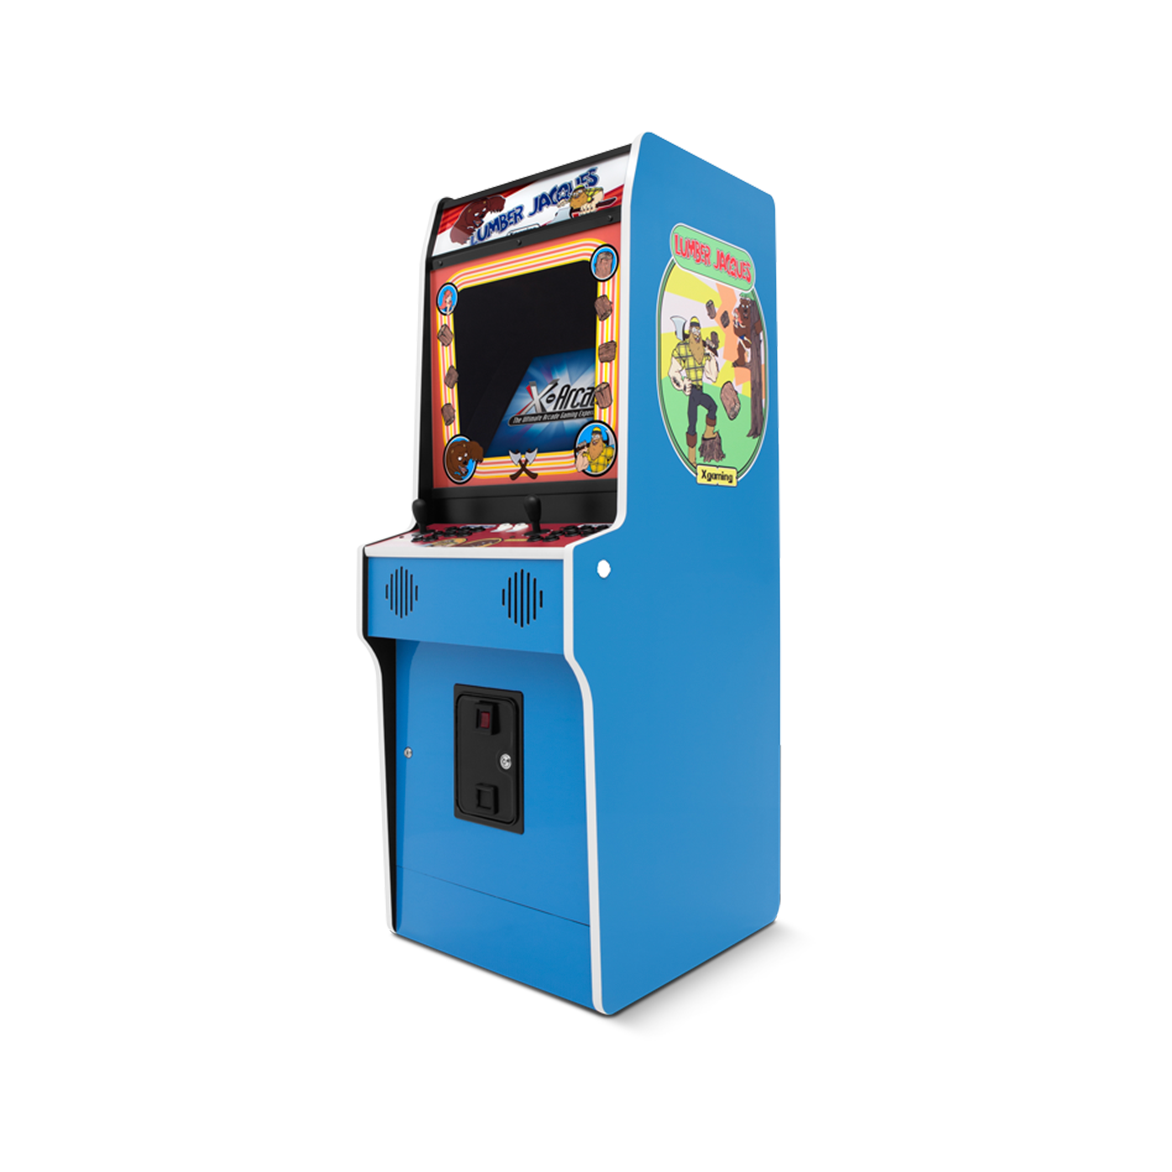 Lumber Jacques" Commercial-Grade Arcade Cabinet